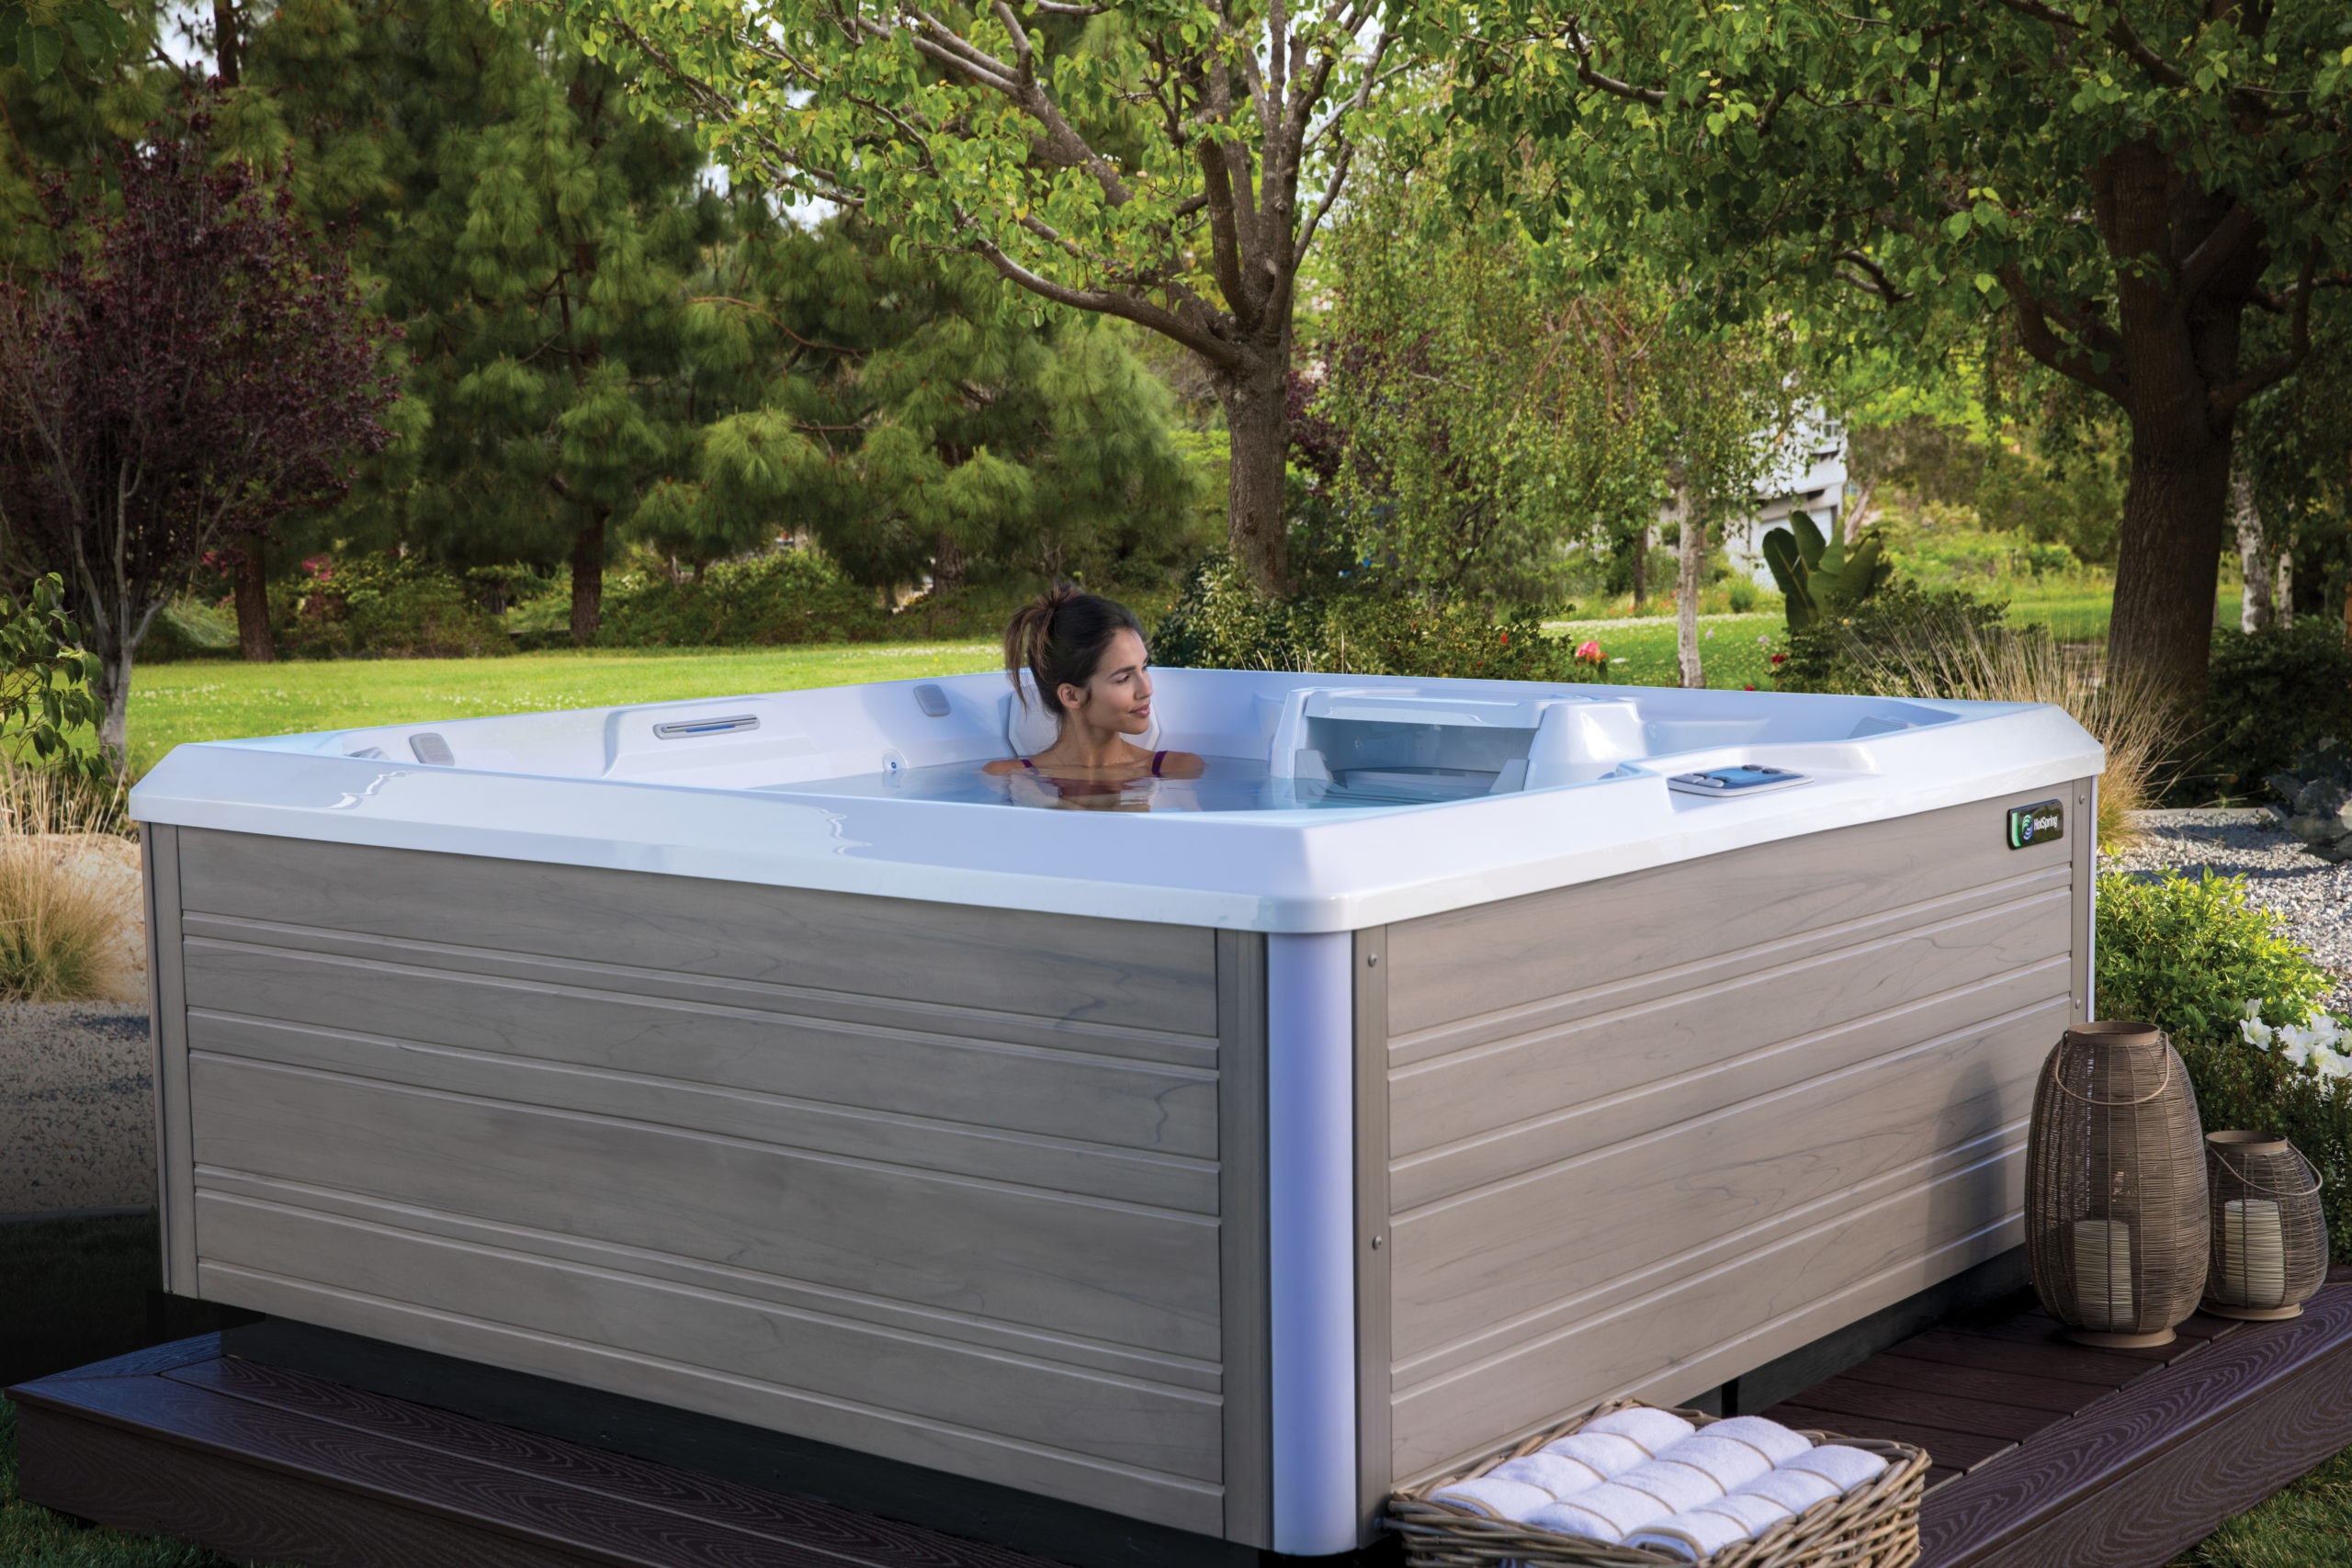 Your hot tub can be your stress-relieving oasis and help you deal with life’s anxieties.